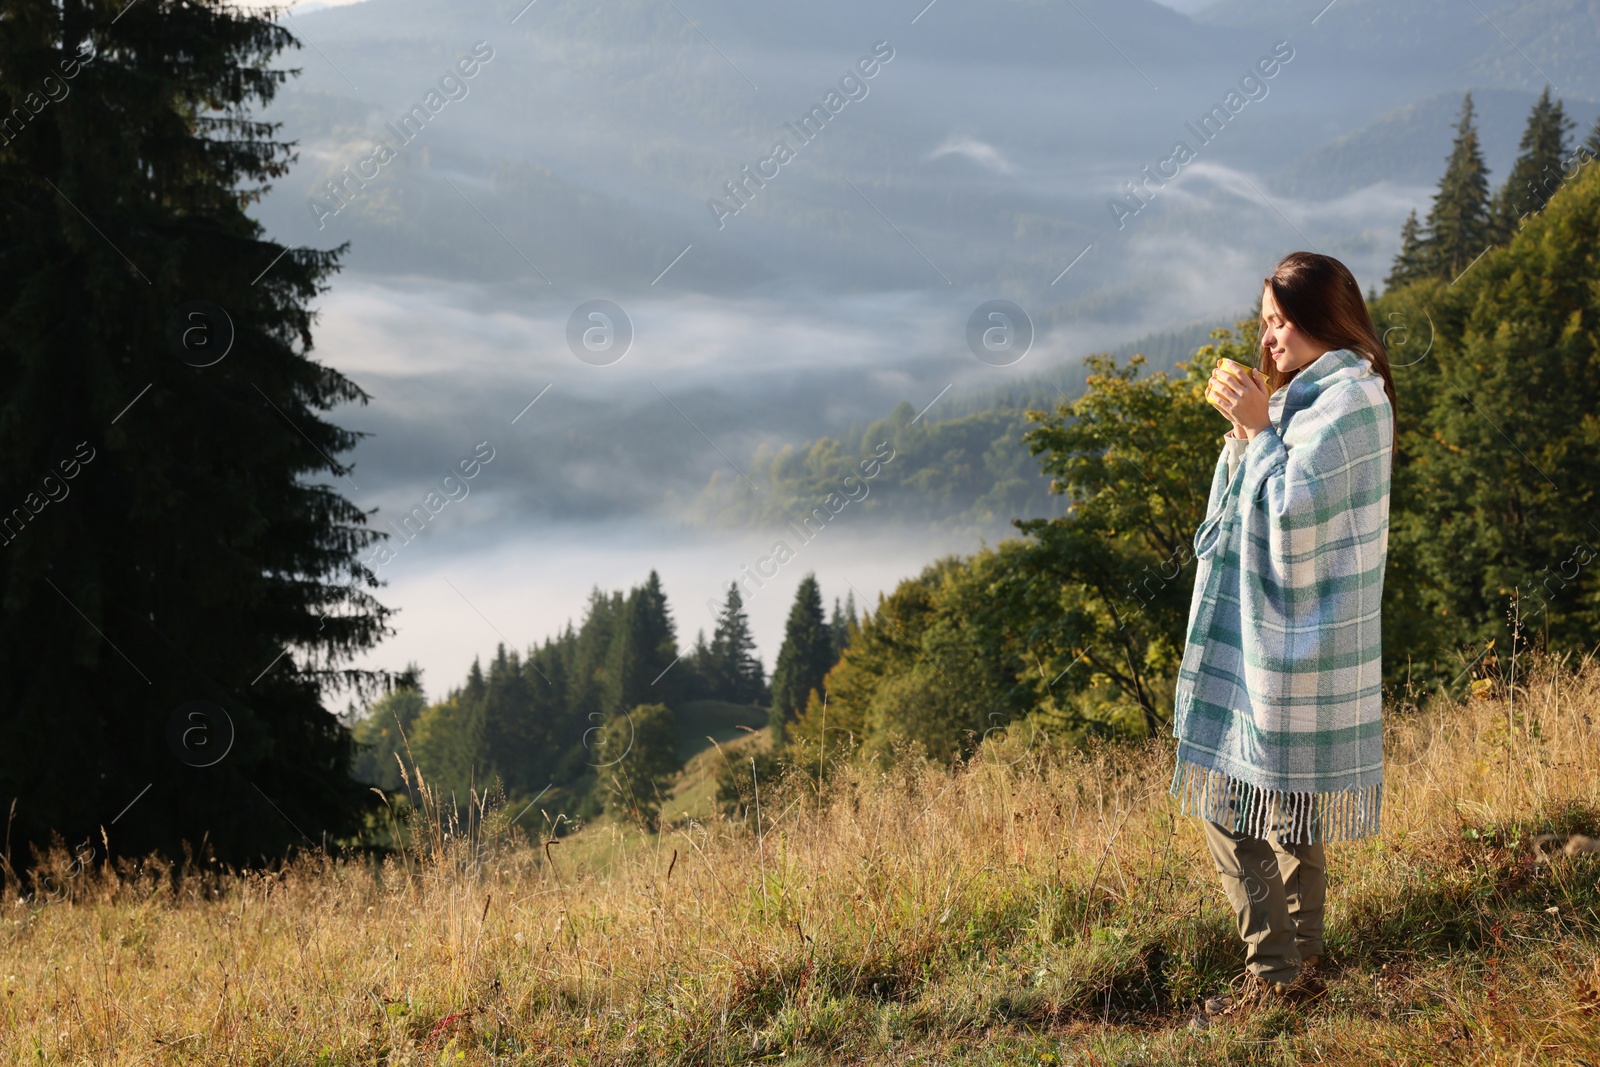 Photo of Woman with cozy plaid enjoying cup of hot beverage in nature